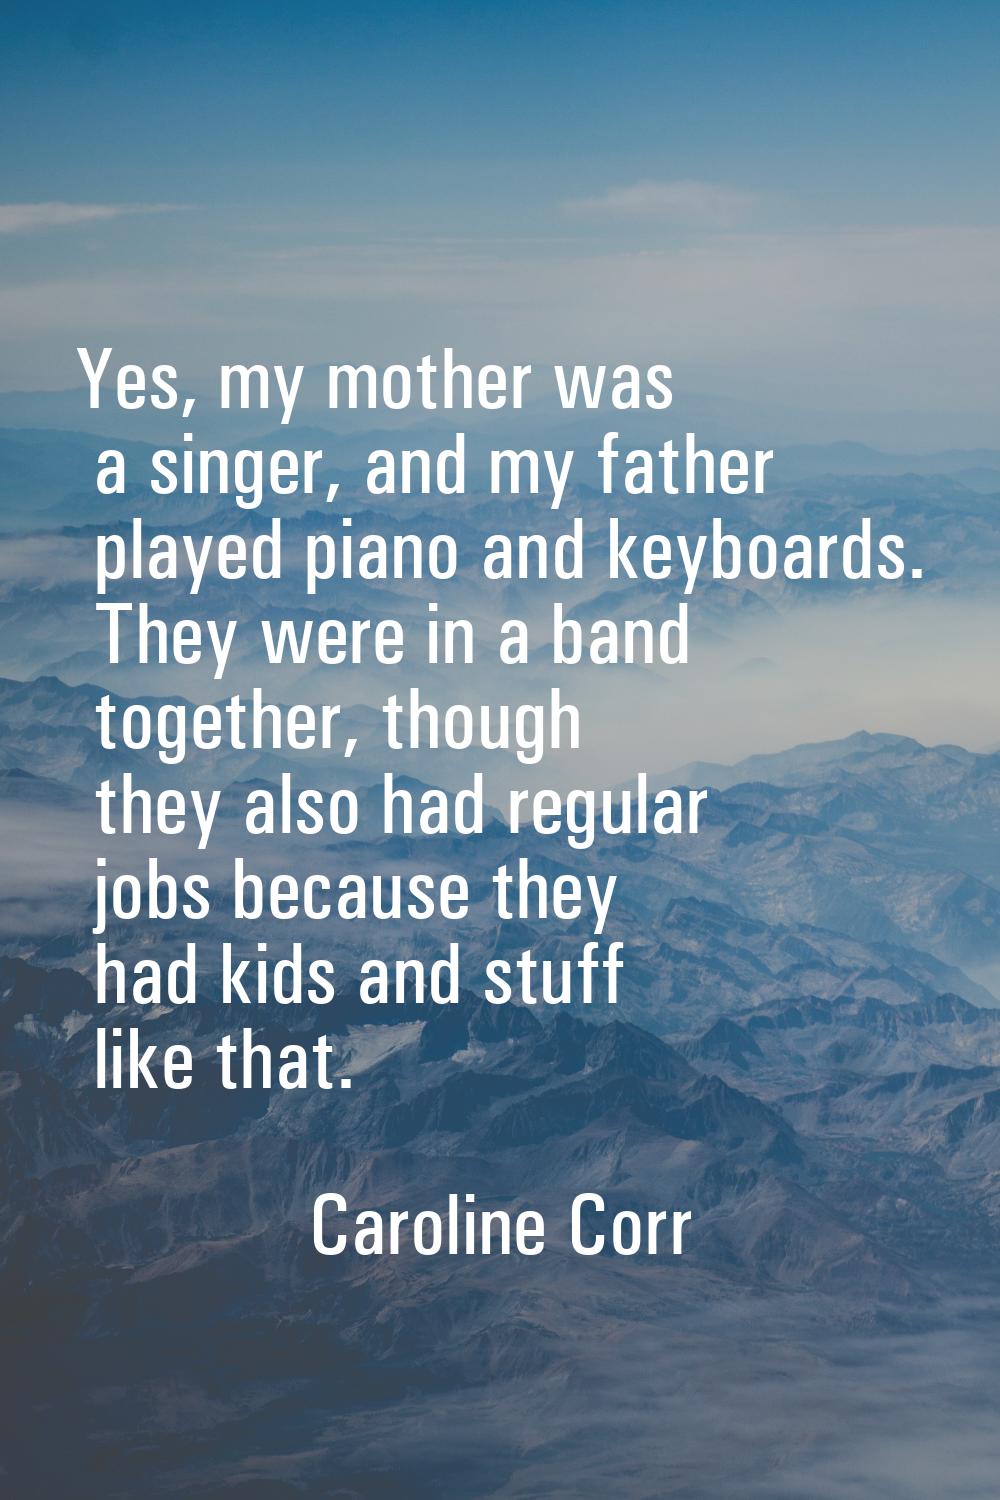 Yes, my mother was a singer, and my father played piano and keyboards. They were in a band together